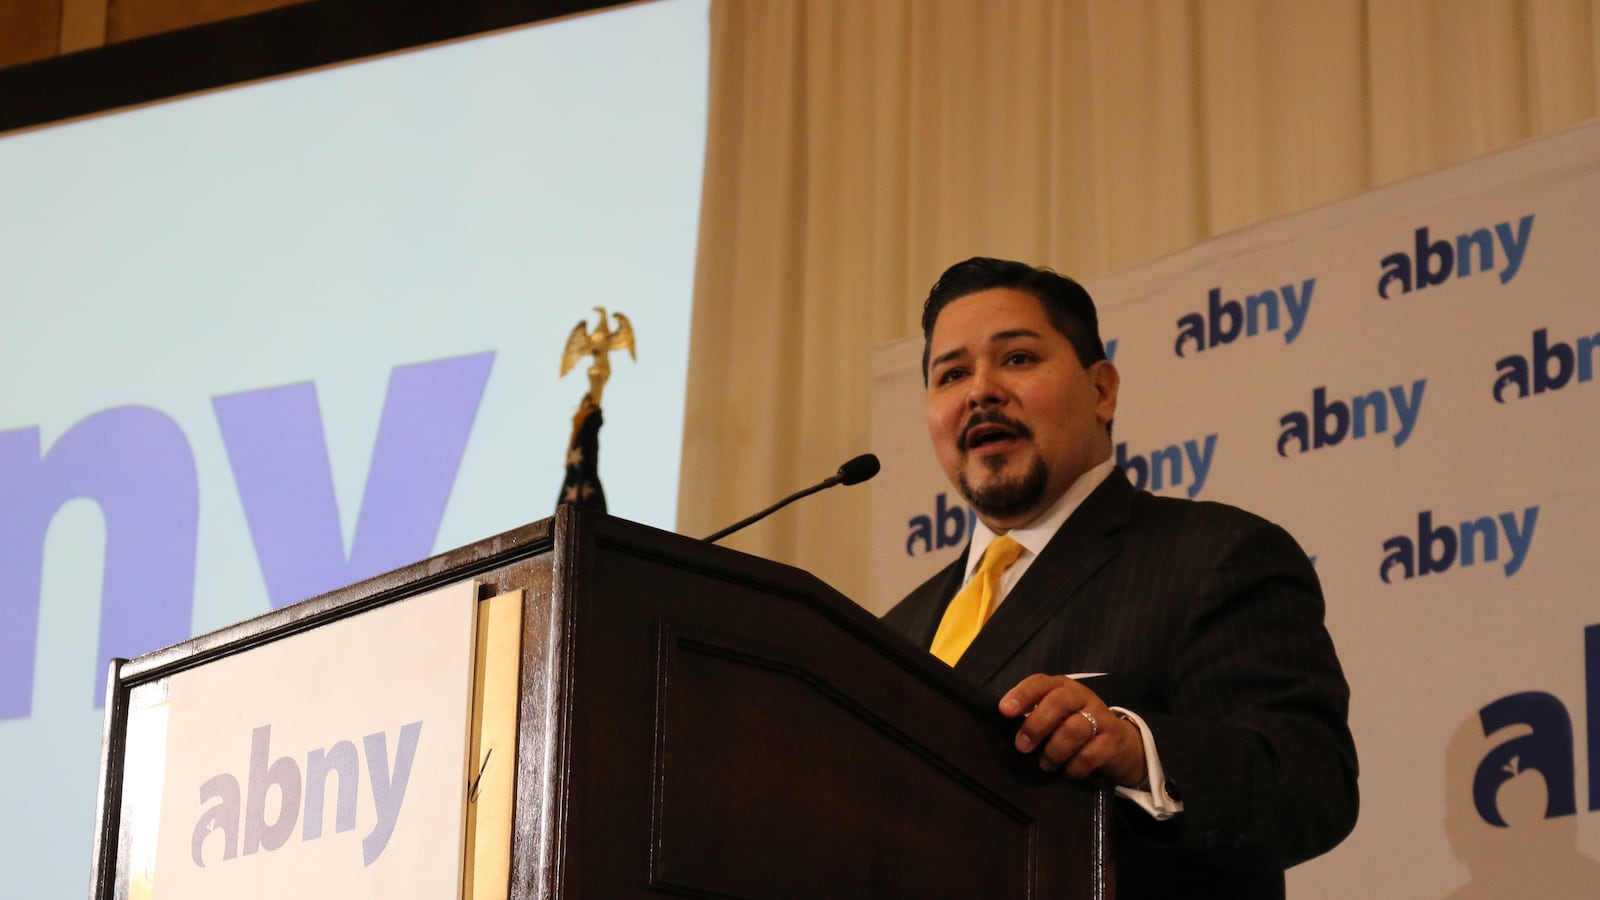 At his first appearance at a high-profile breakfast organized by the Association for a Better New York, Richard Carranza laid out his priorities for his first school year as chancellor.